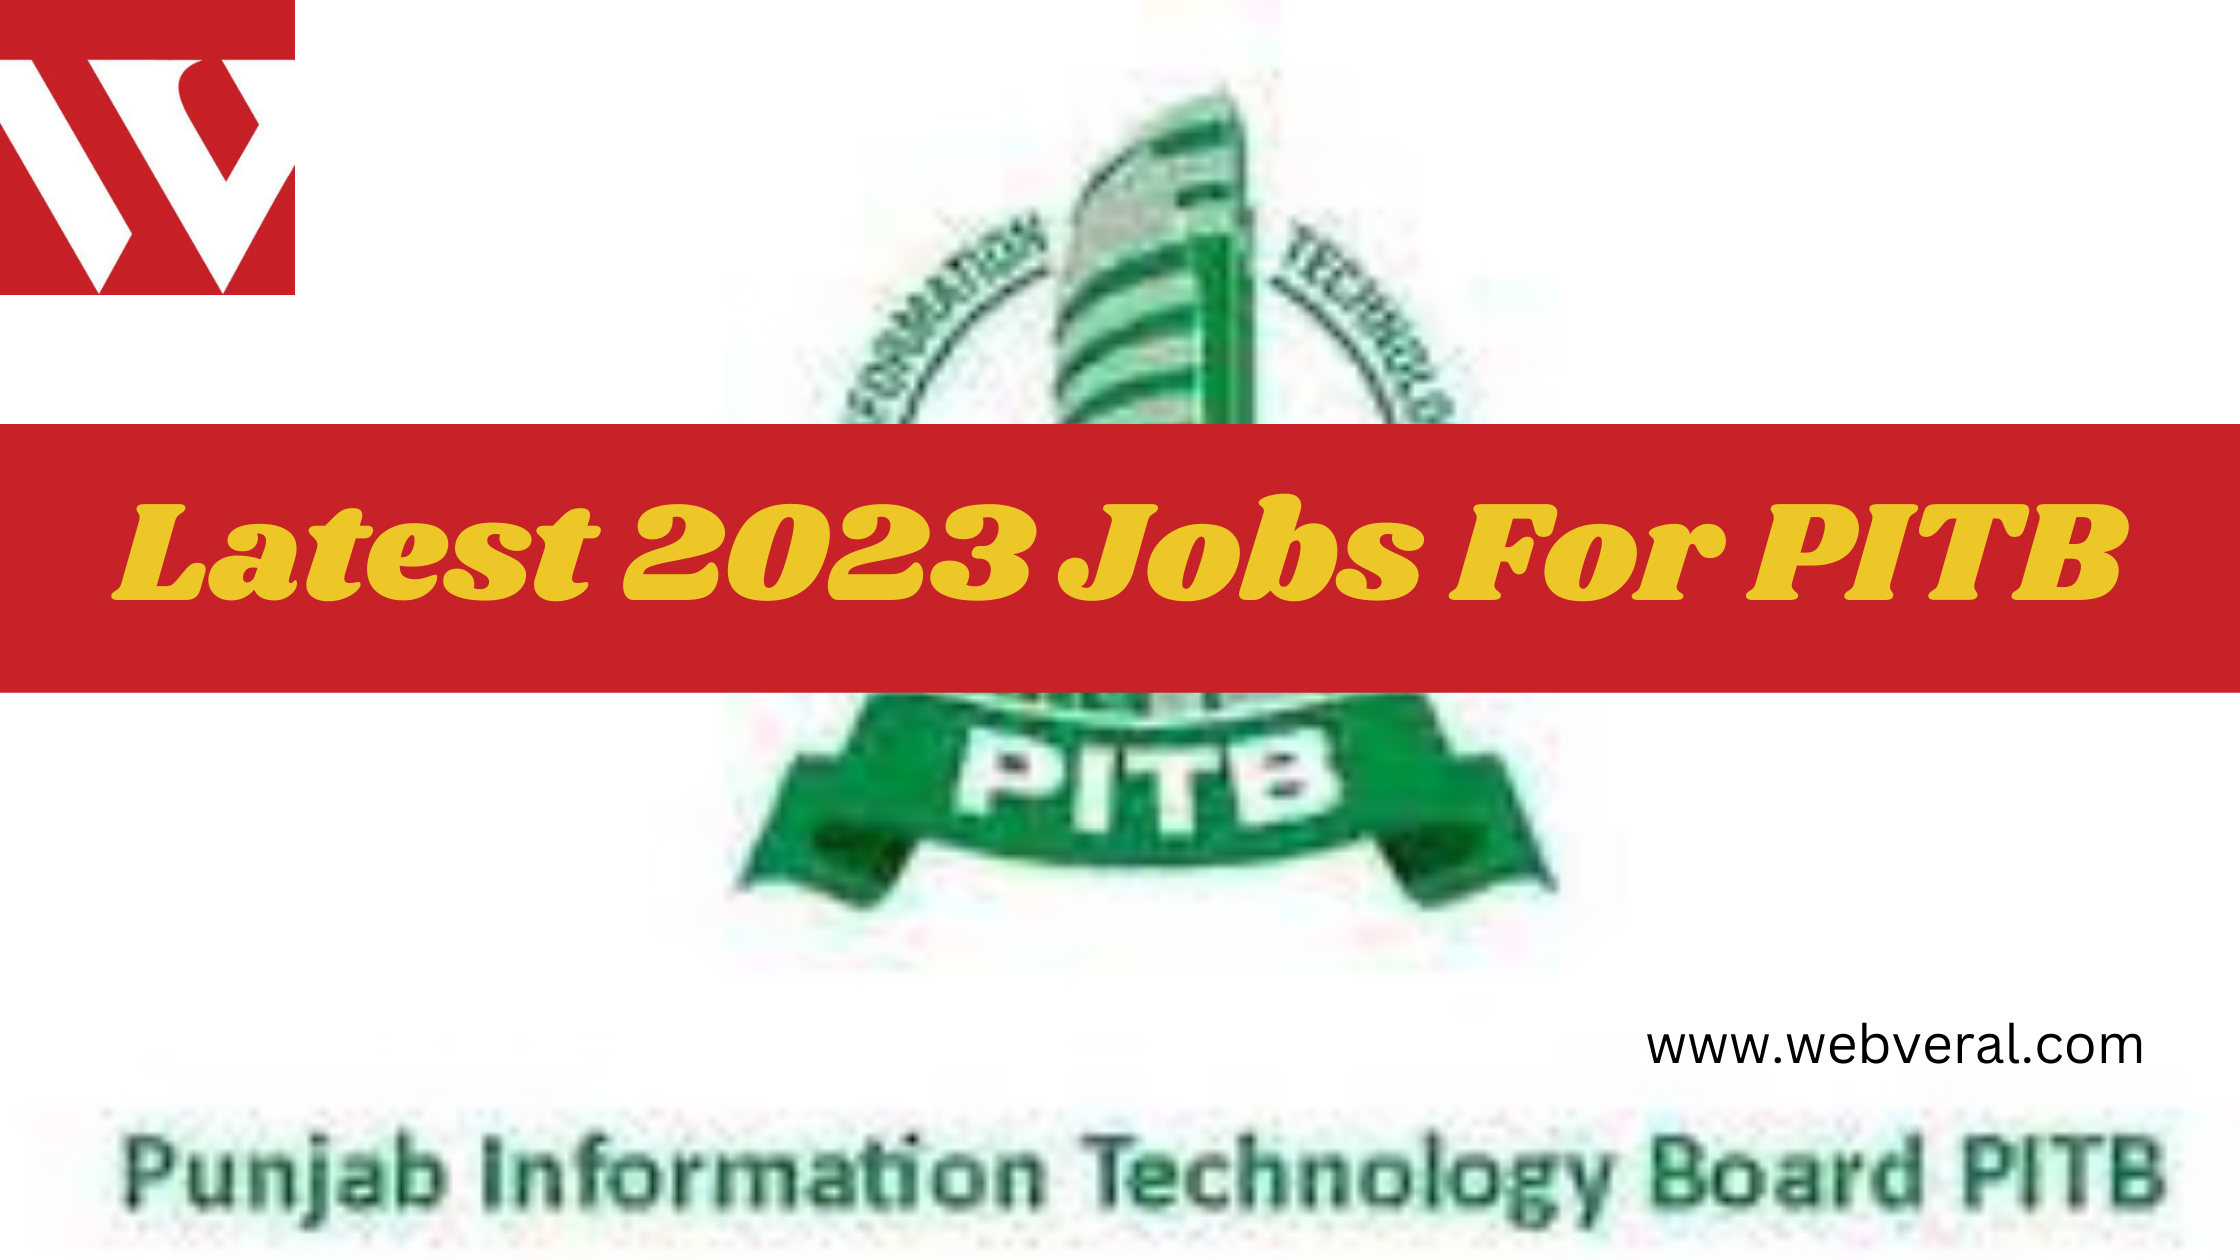 Latest 2023 Jobs For PITB